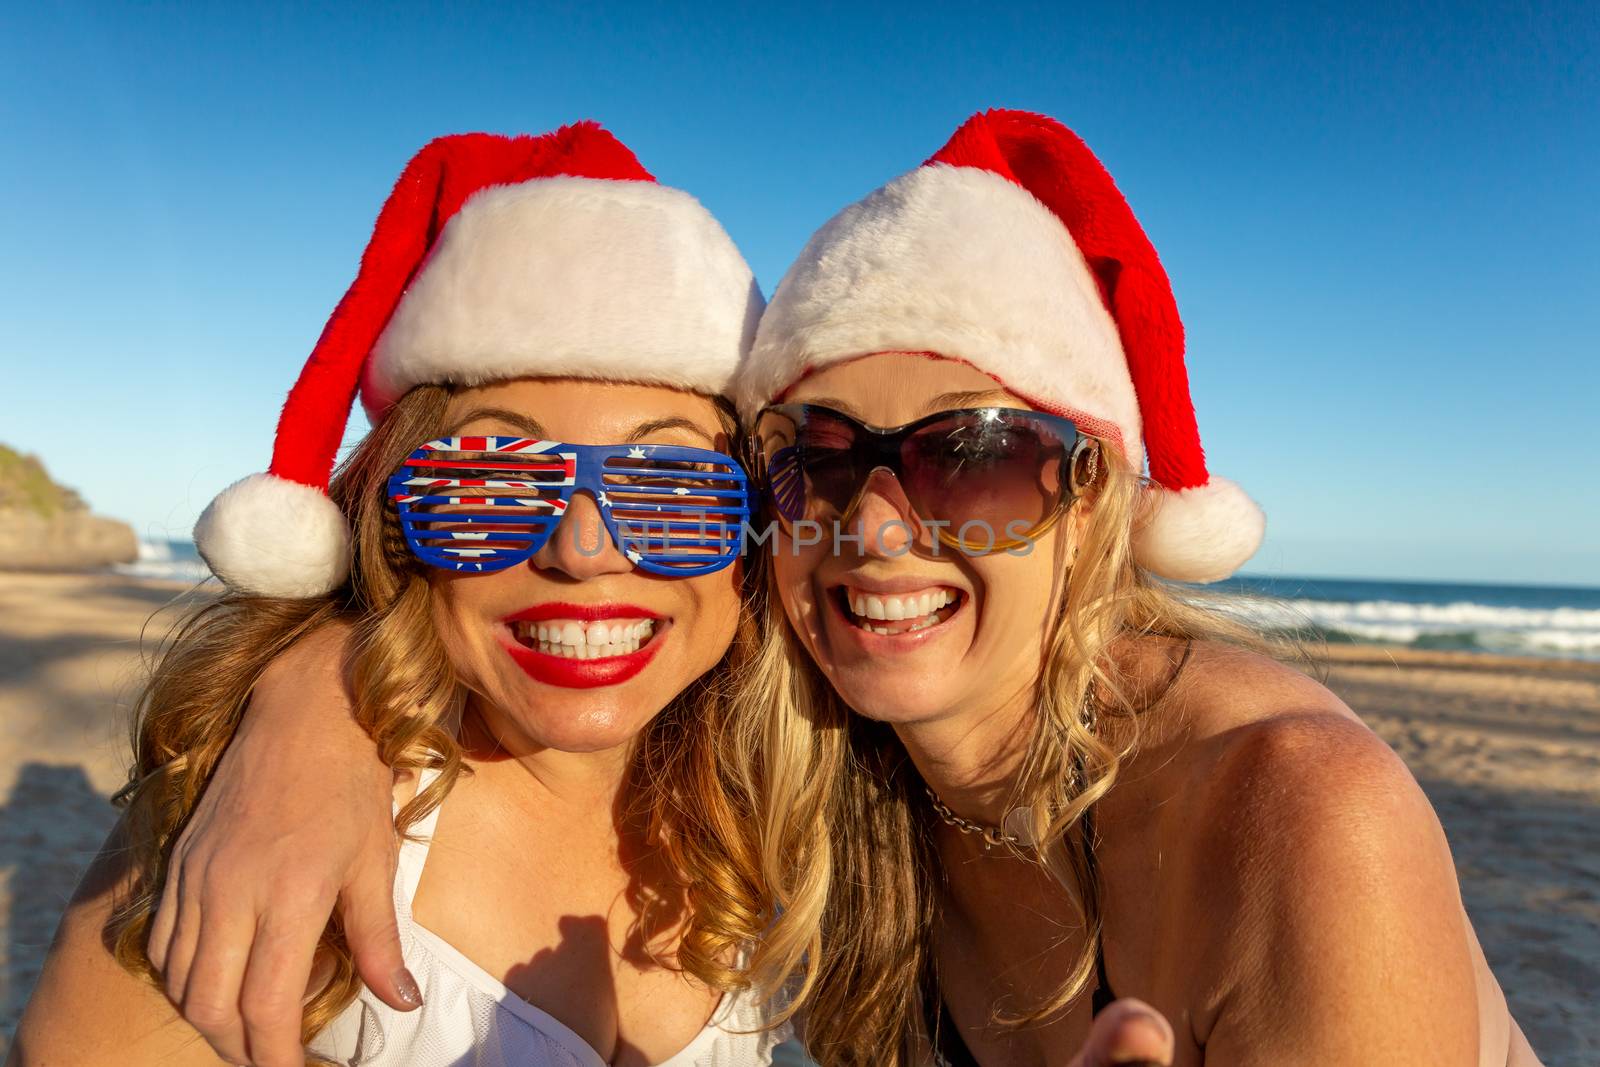 Happy women on the beach having fun Christmas party by lovleah